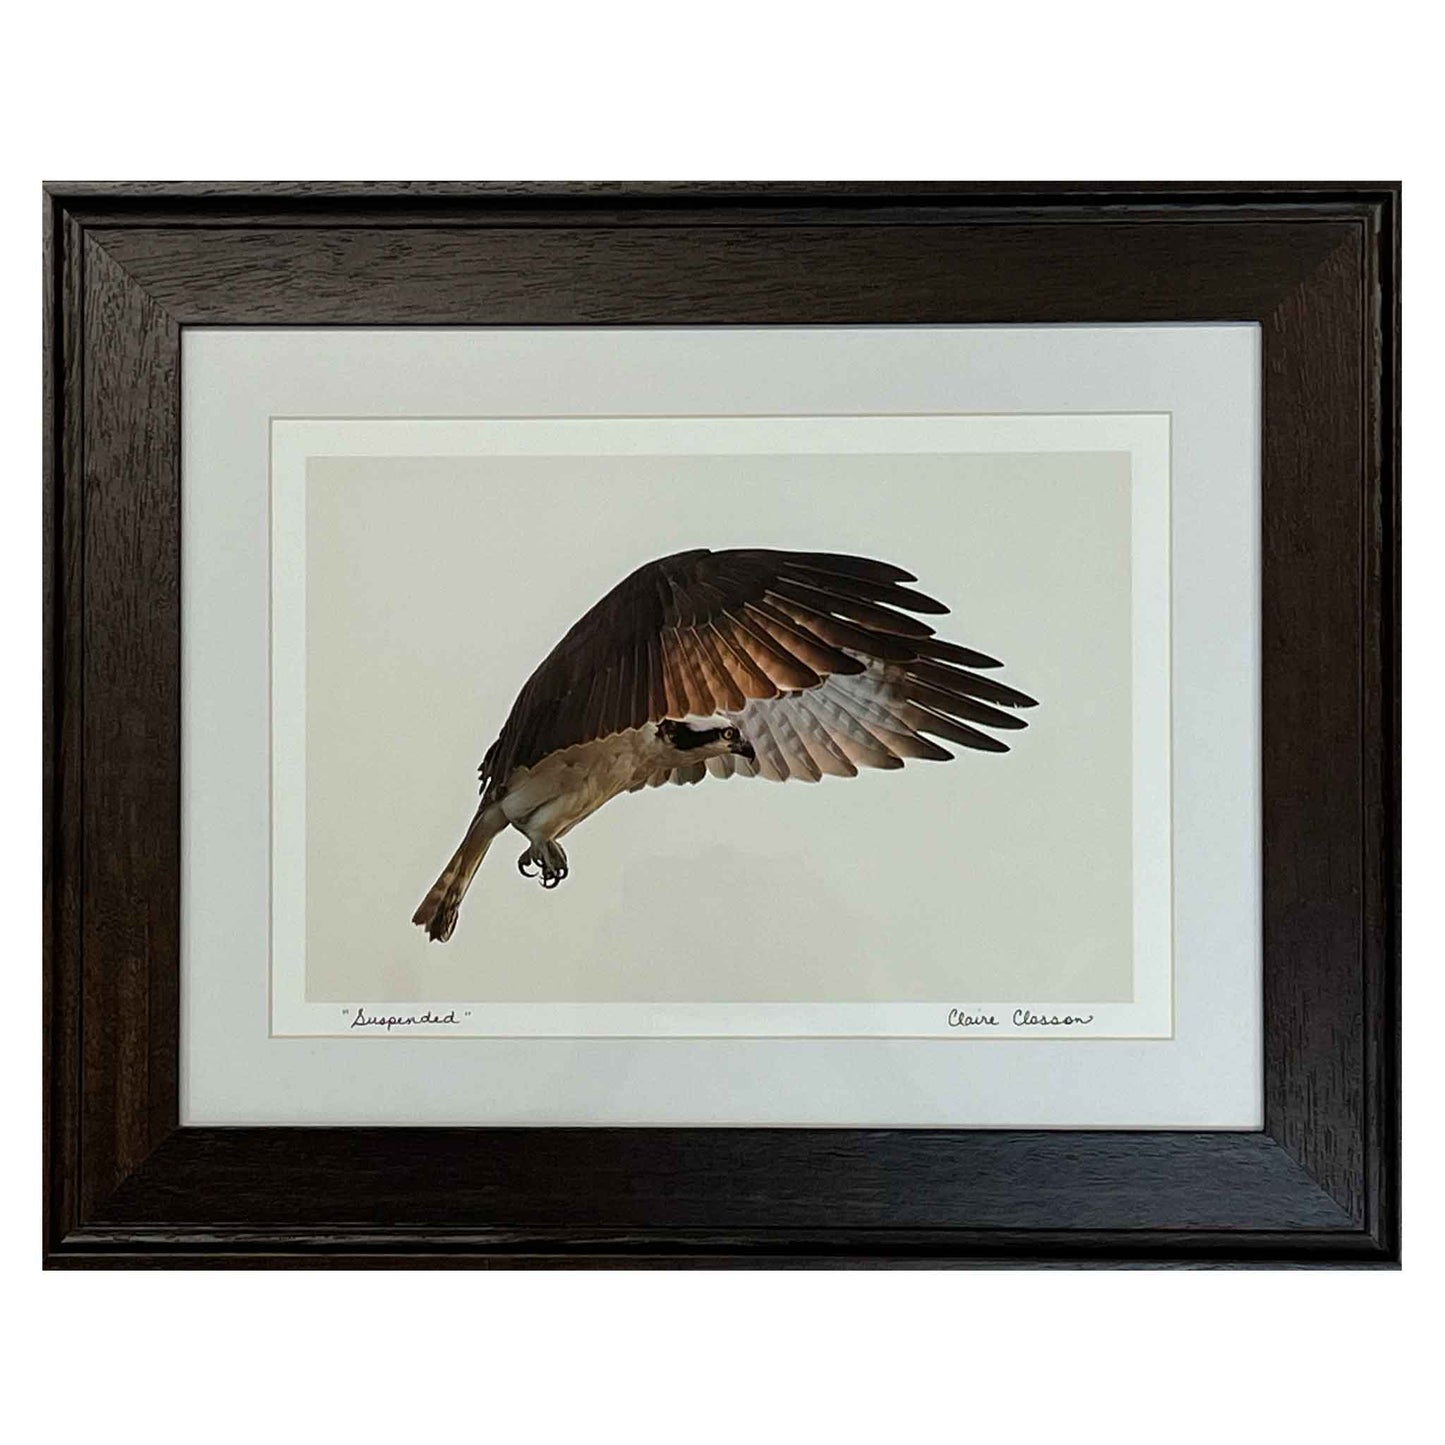 ECC Suspended Framed Print. Wild bird photograph. Osprey in flight. 8"x12" white matted print of Osprey suspended in mid-air in 12"x16" dark brown wooden frame with glass. by photographer Claire Closson.